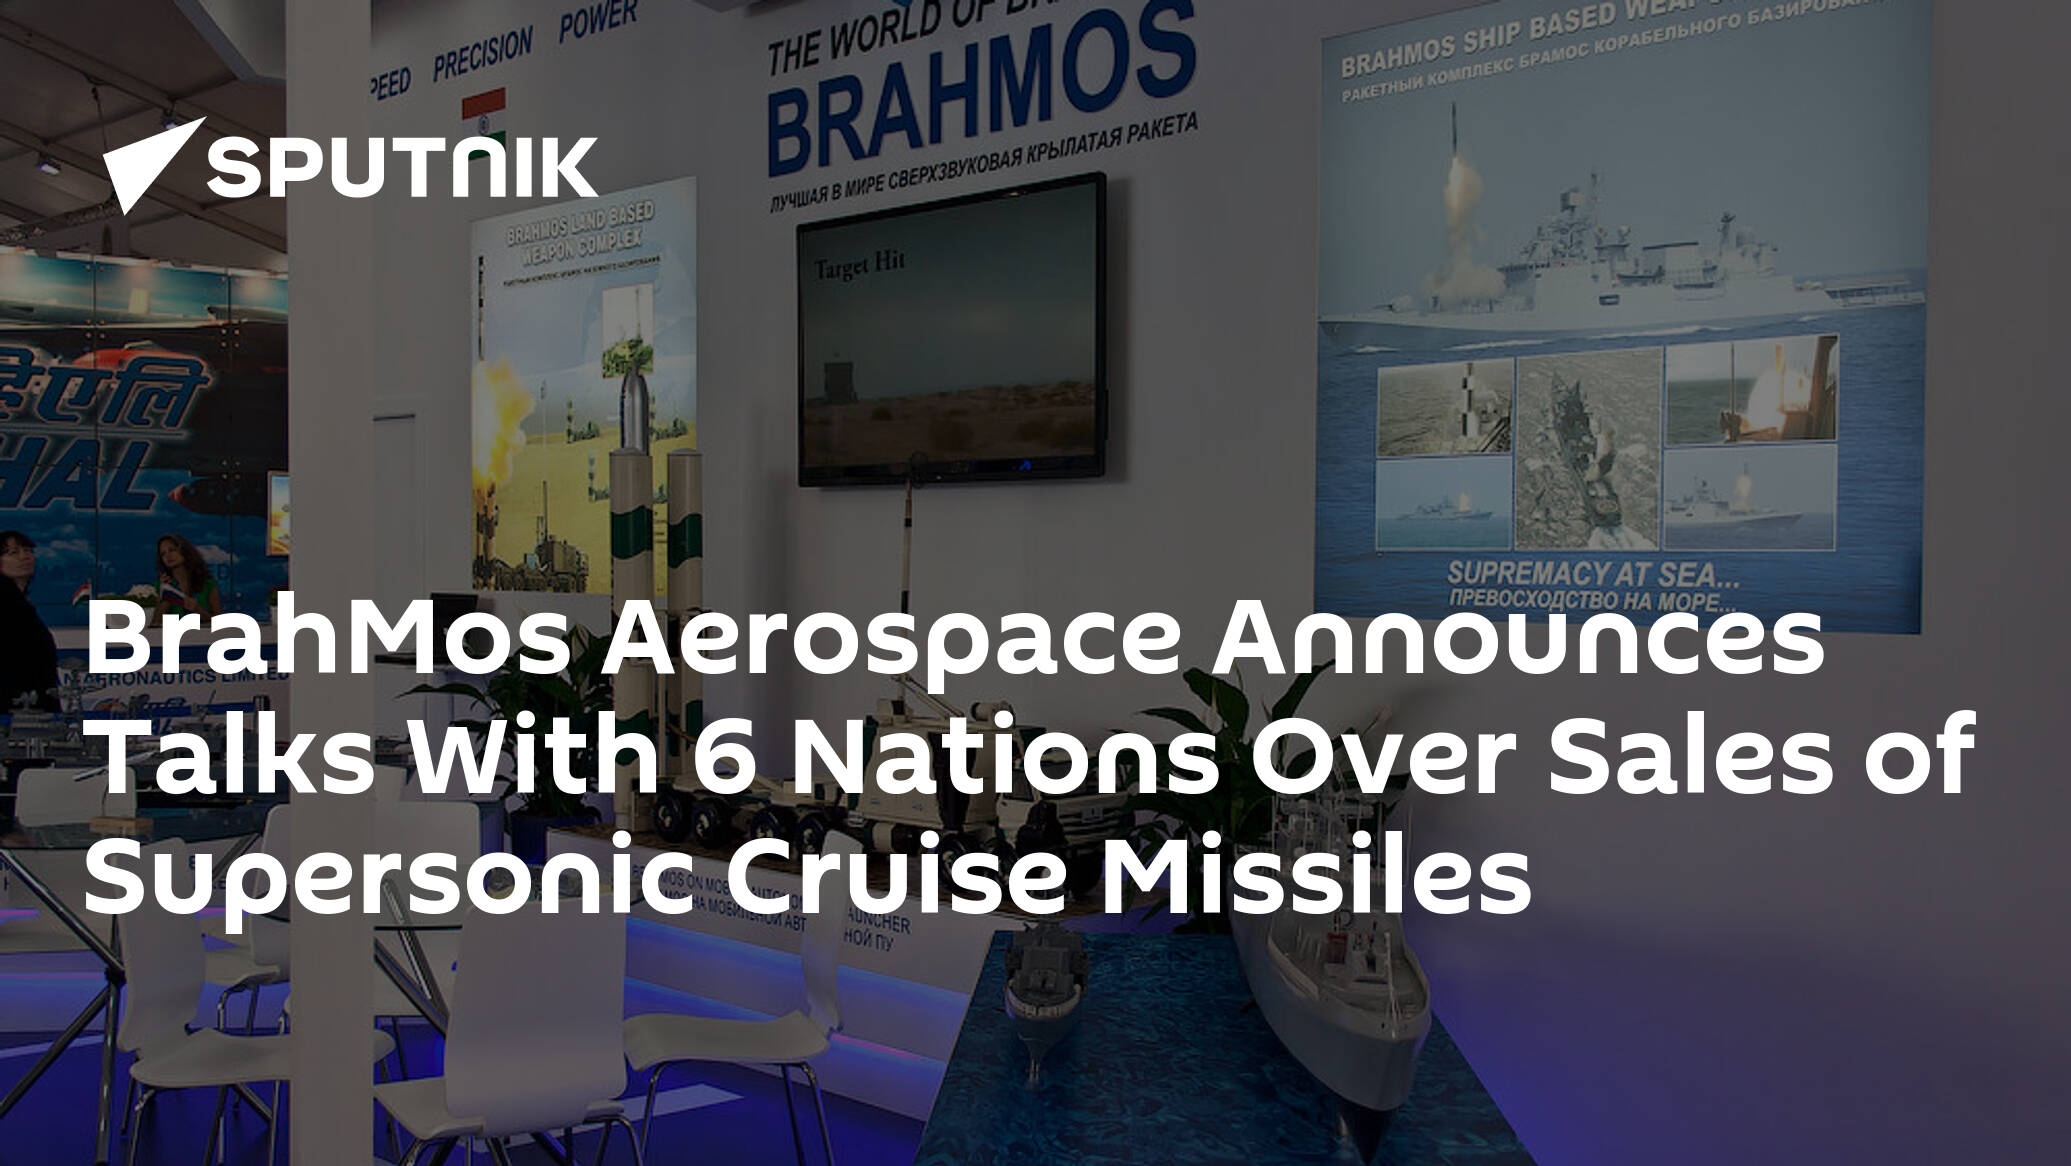 BrahMos Aerospace Announces Talks With 6 Nations Over Sales of Supersonic Cruise Missiles